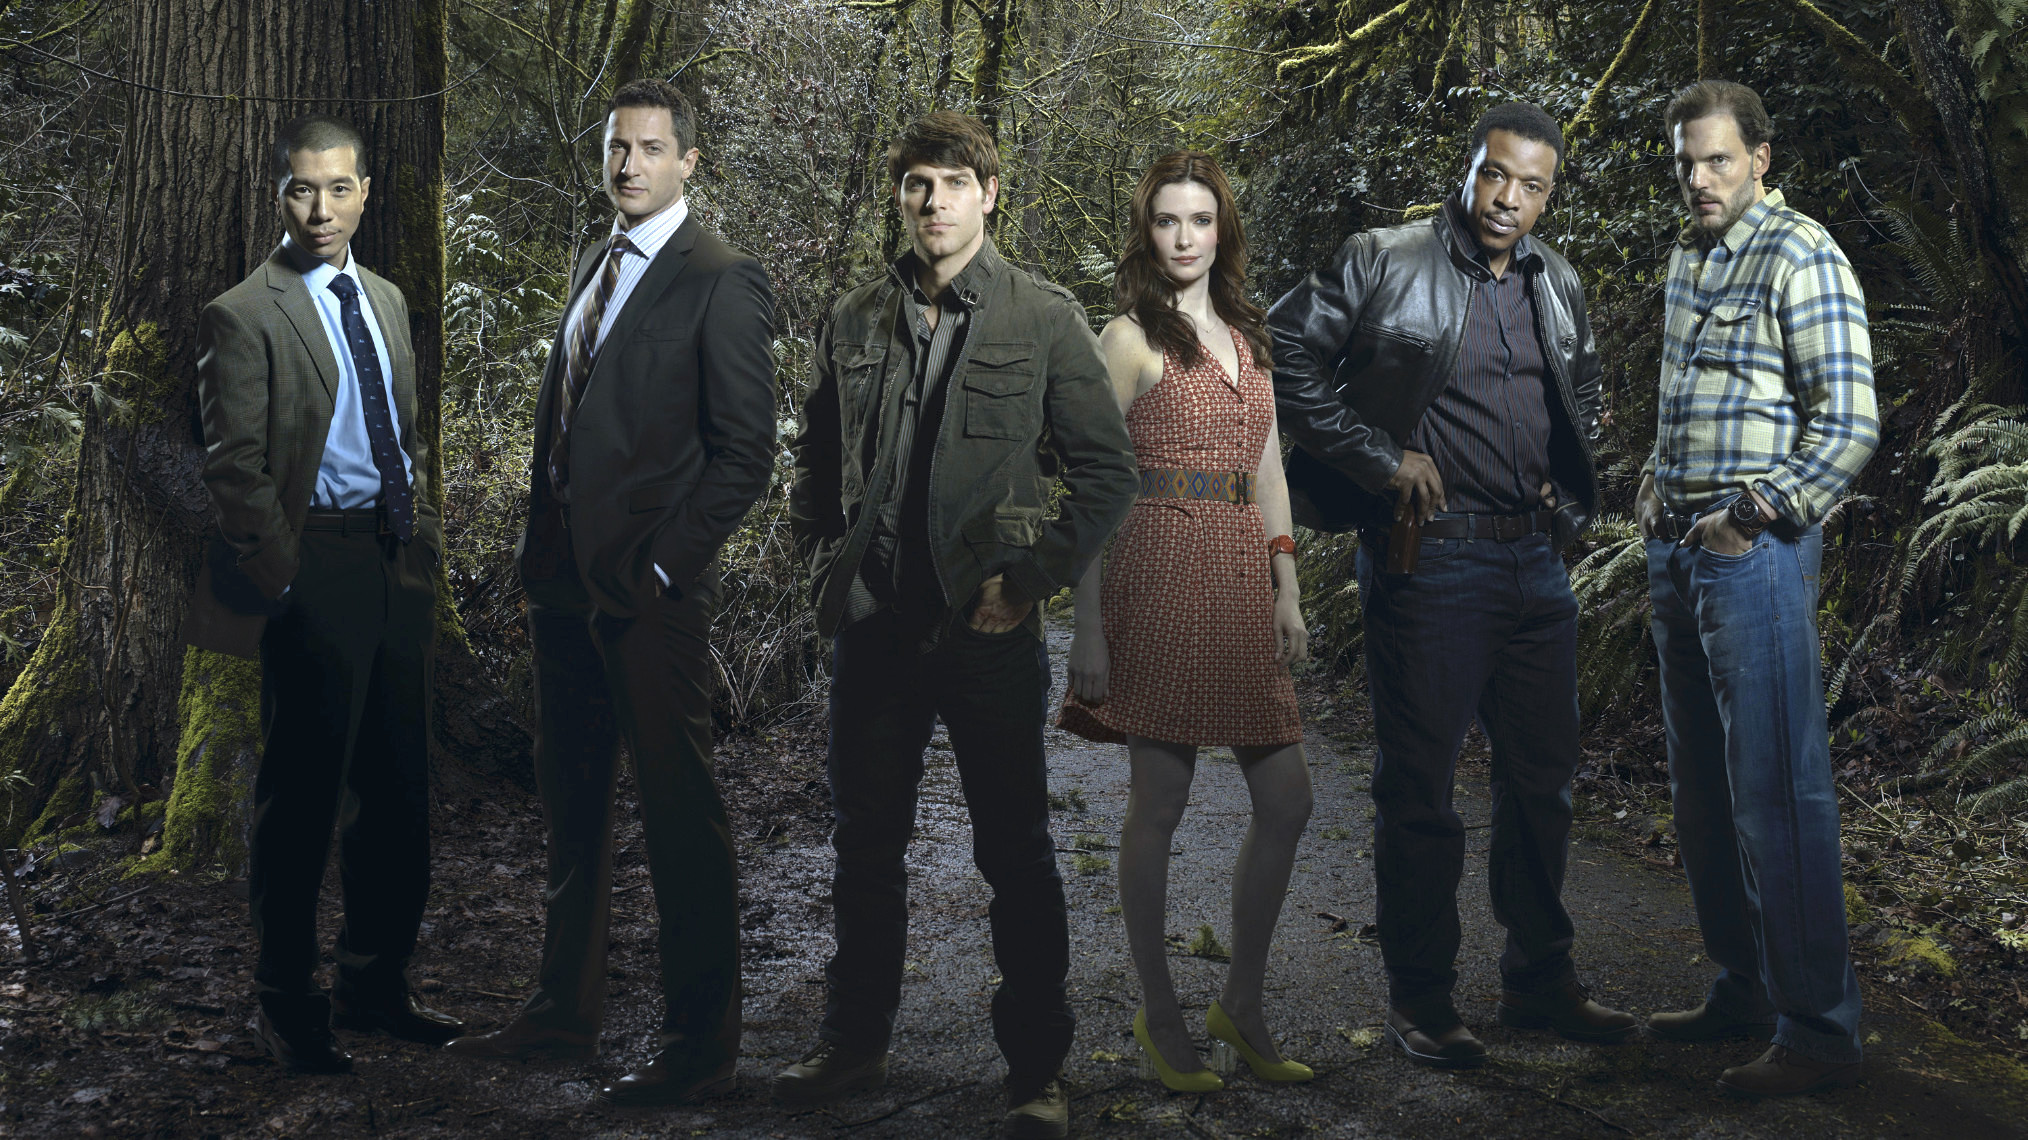 Russell Hornsby Reminisces About Grimm 10 Years After Its Premiere